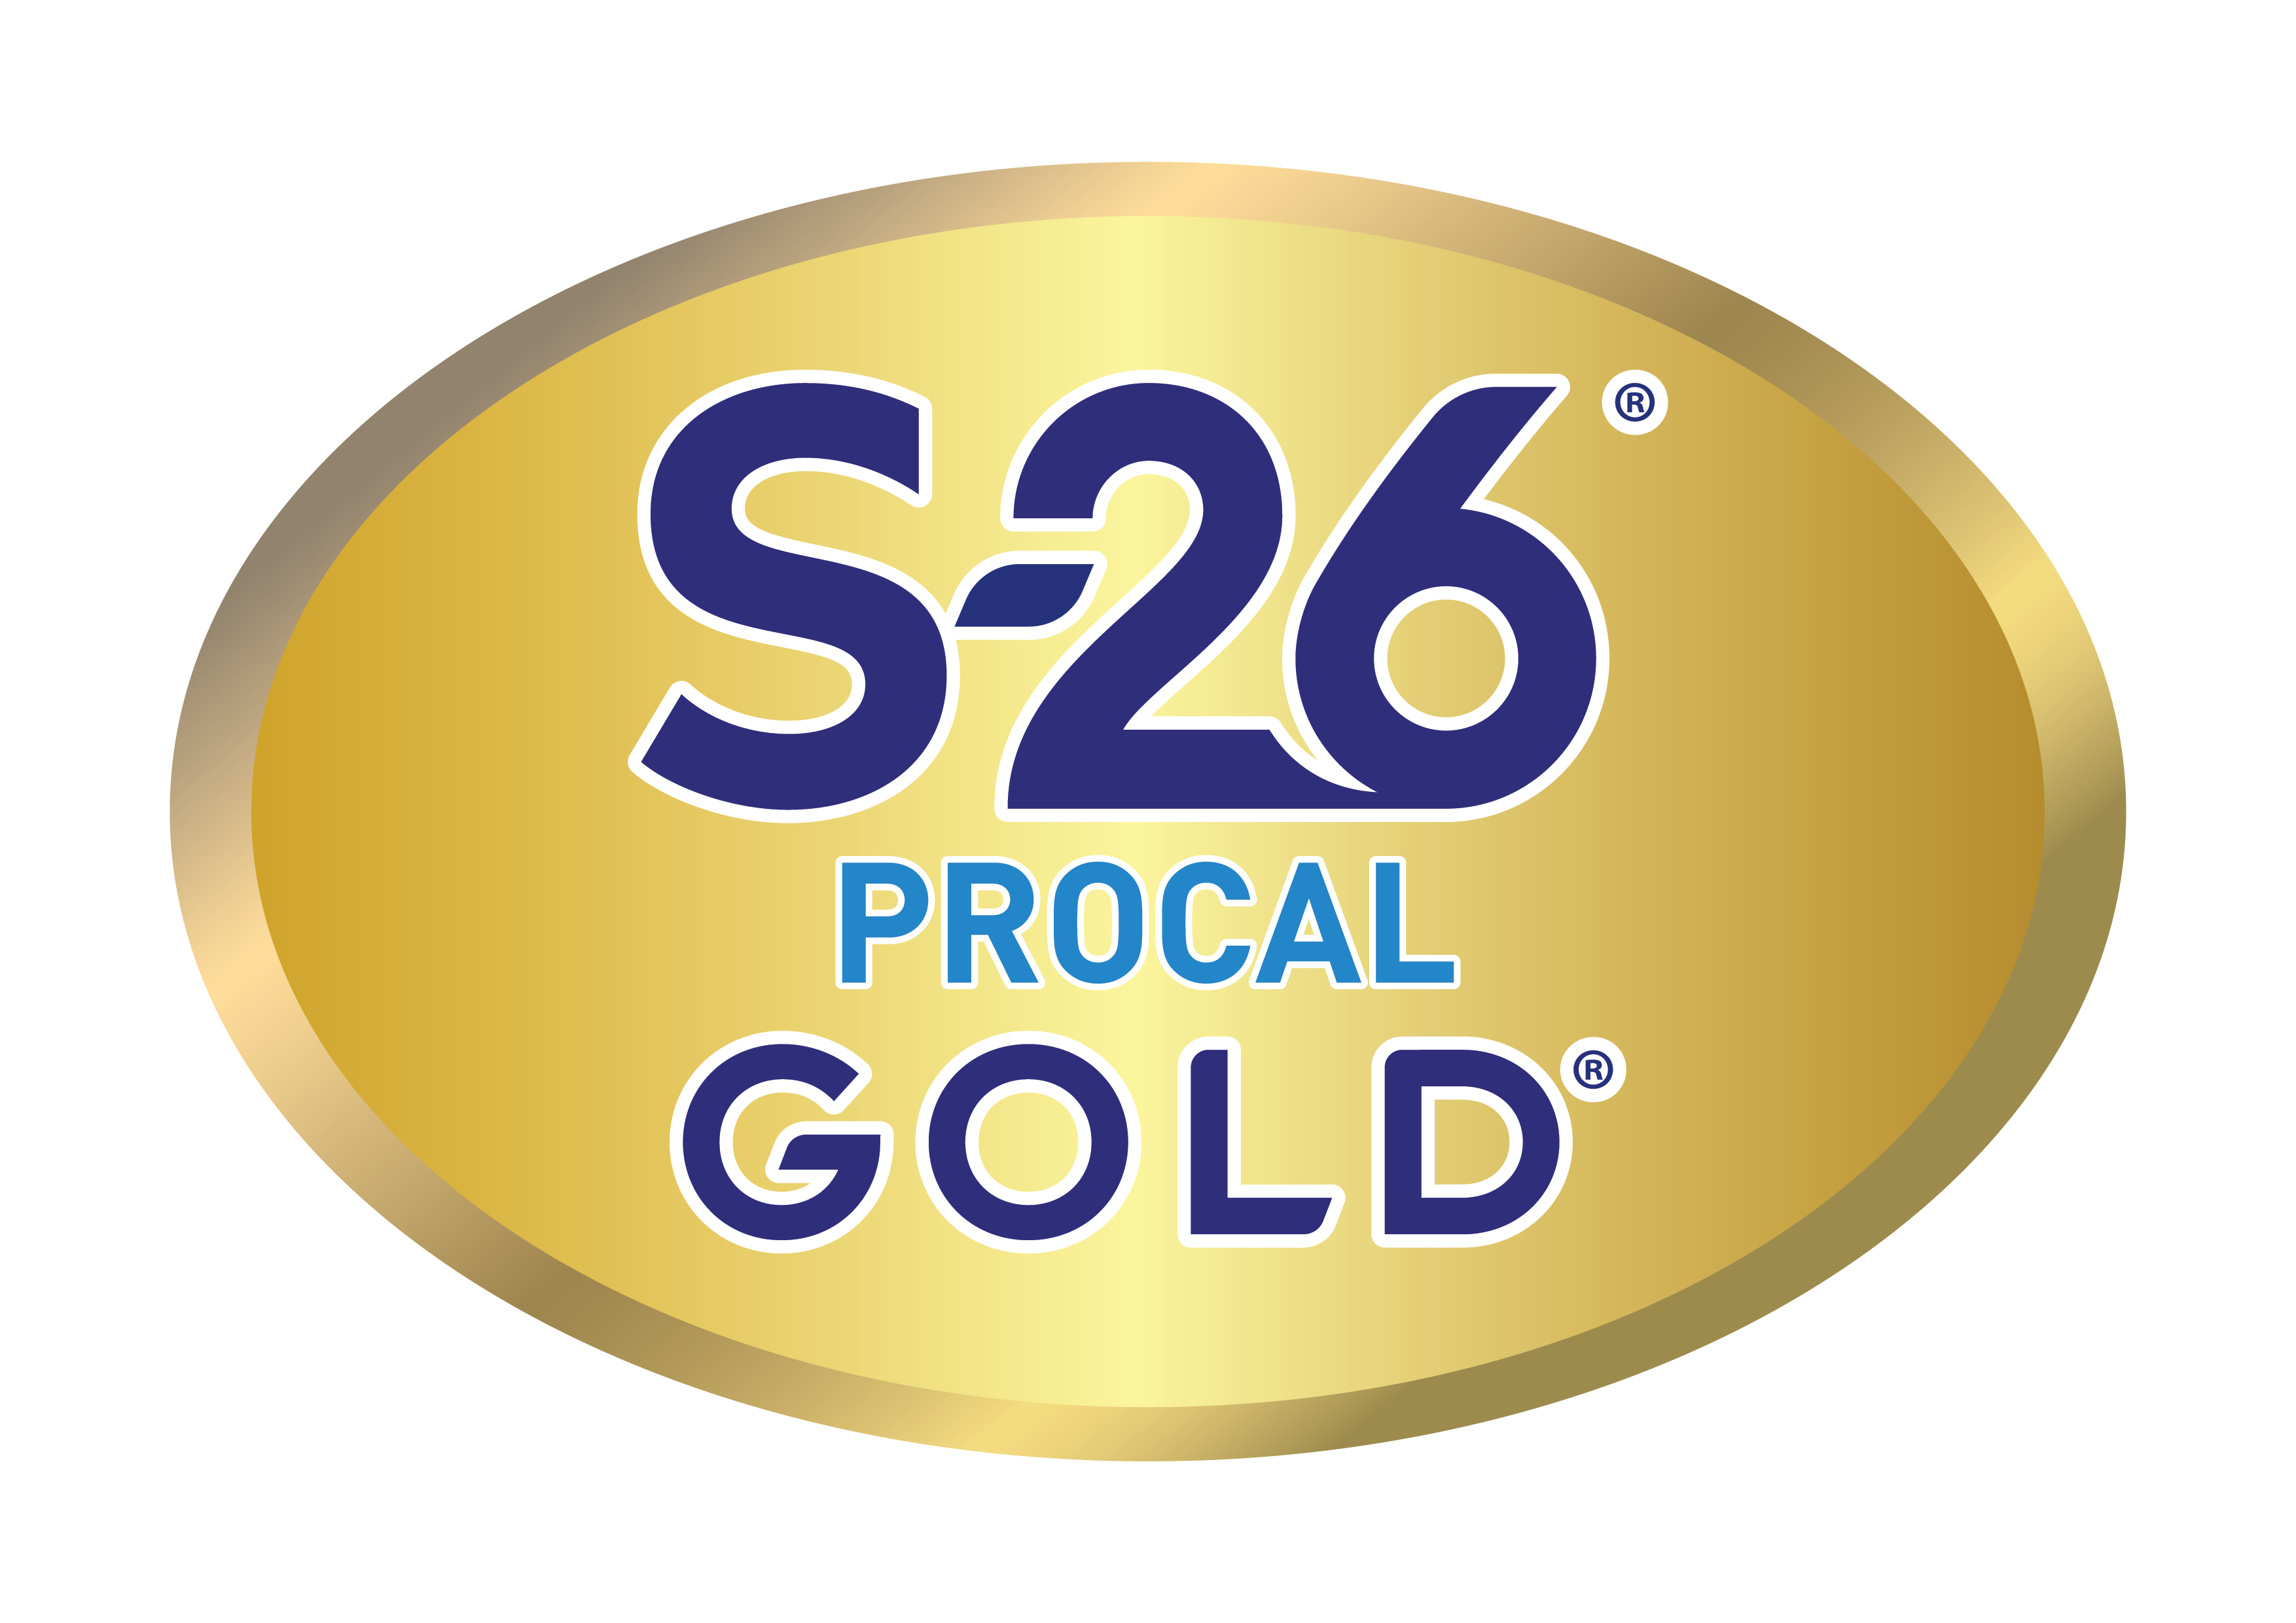 Wyeth S-26 Procal GOLD Drives Awareness with an AR Ad Experience